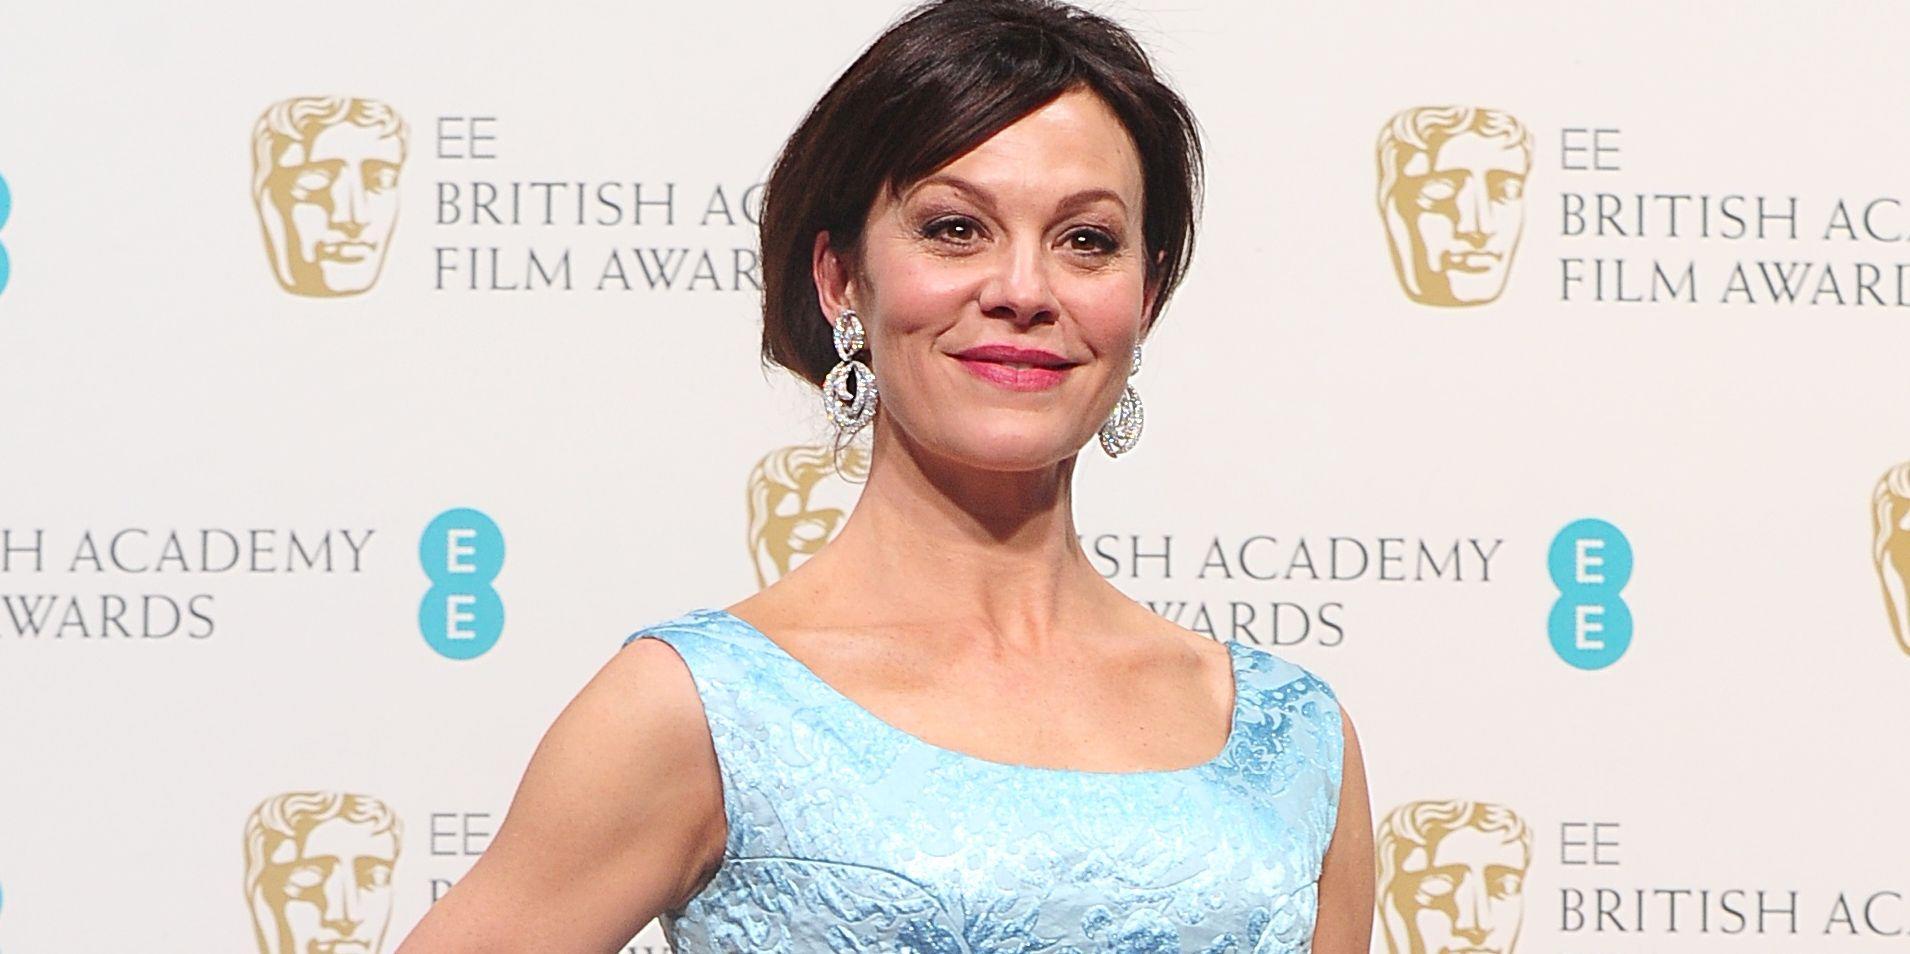 Harry Potter and Peaky Blinder Actress Helen McCrory Has Passed Away at the Age of 52